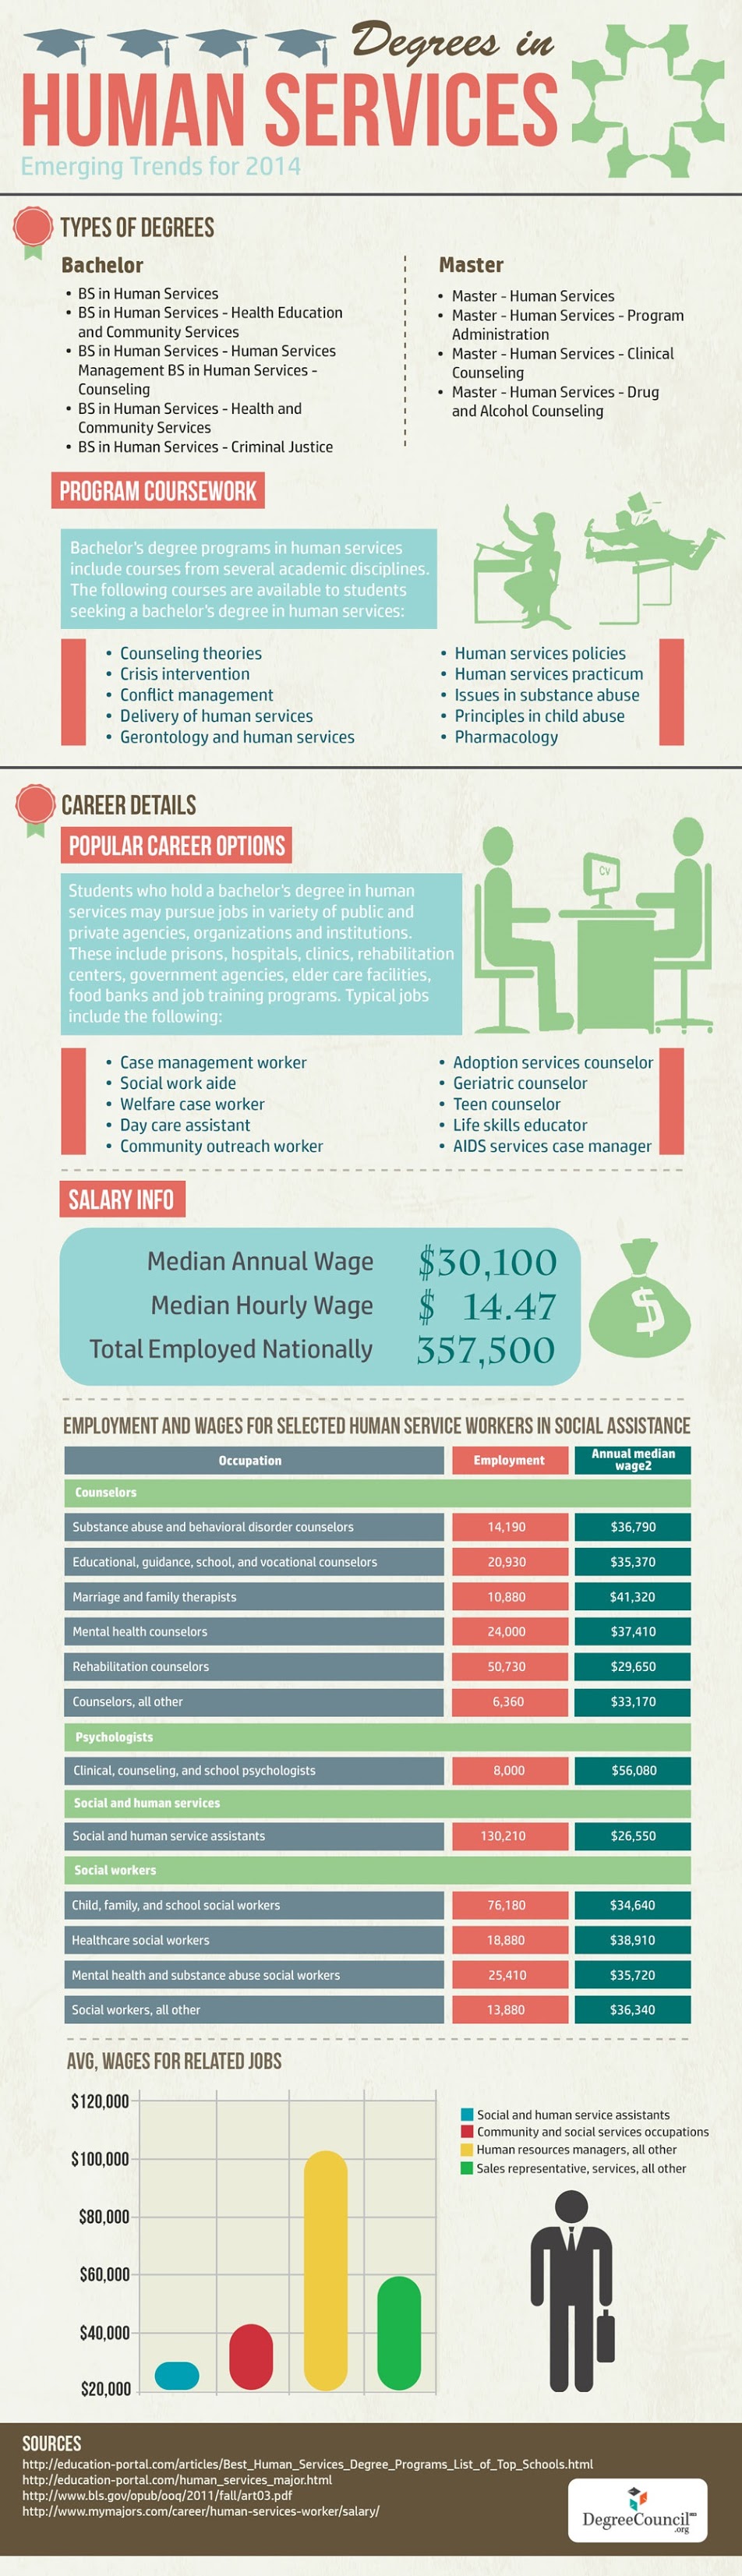 Infographic: Degrees in Human Services - 2014 Emerging Trends #infographic